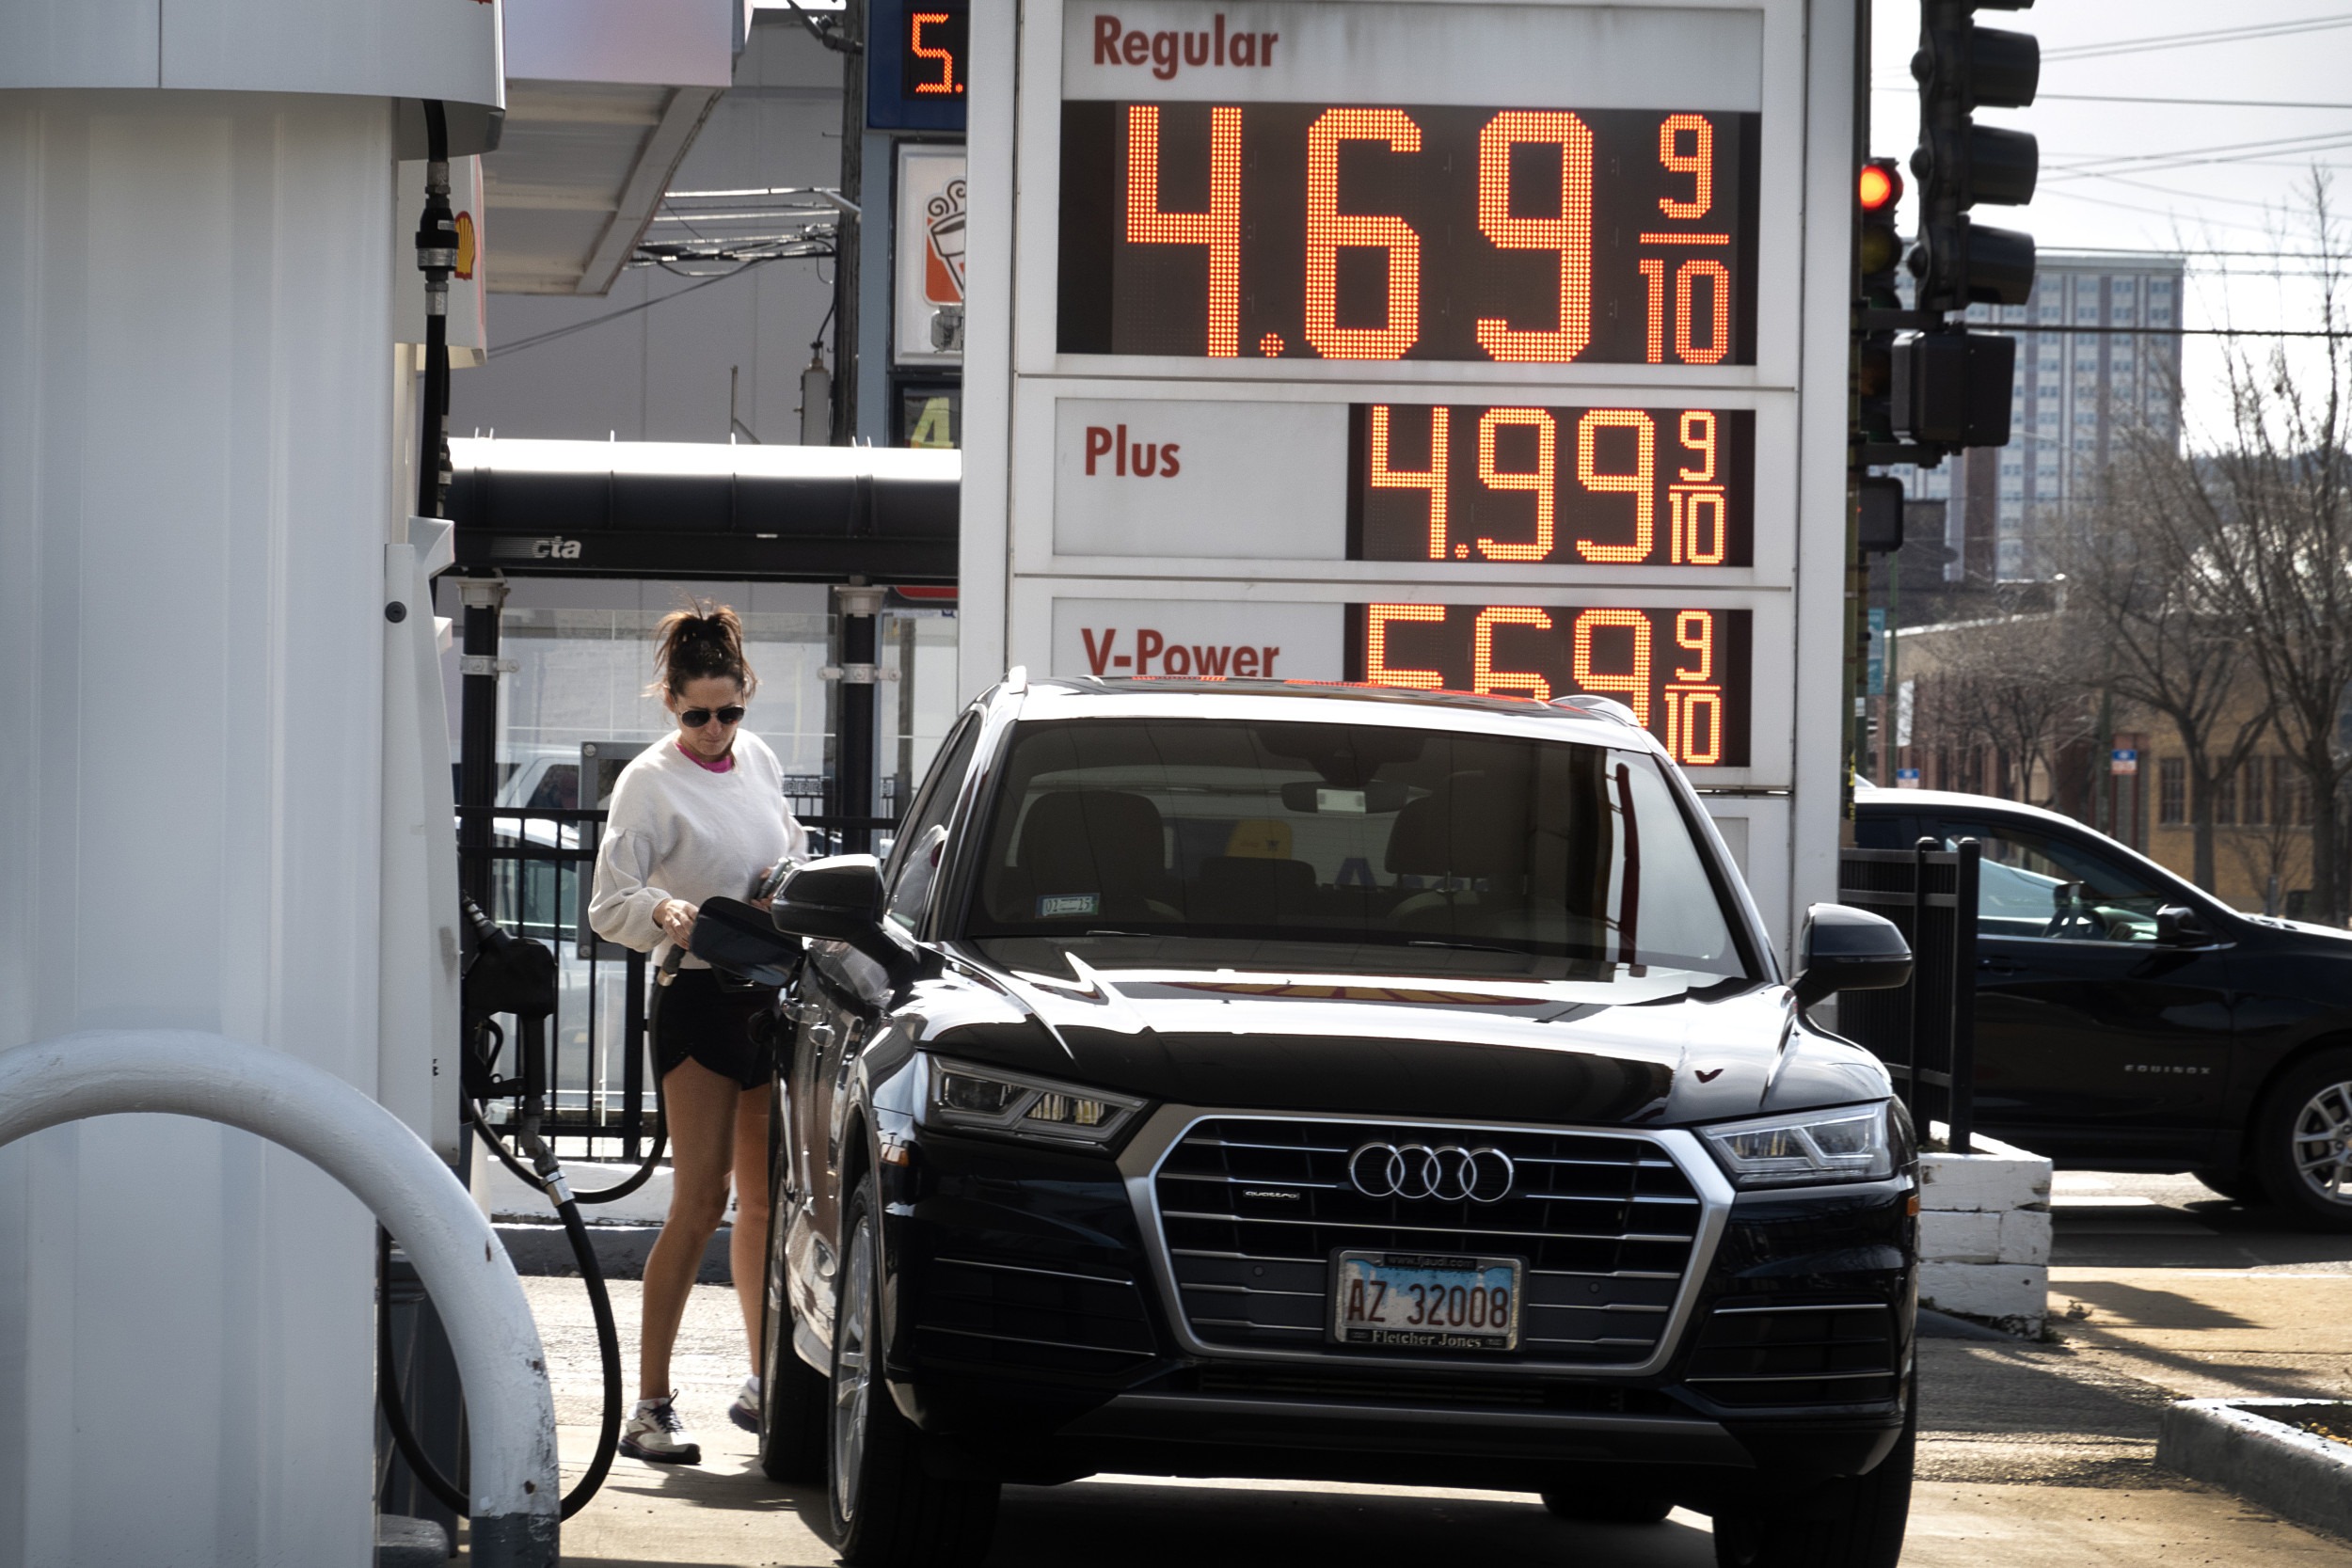 Gas Tax Increased For Millions of Americans